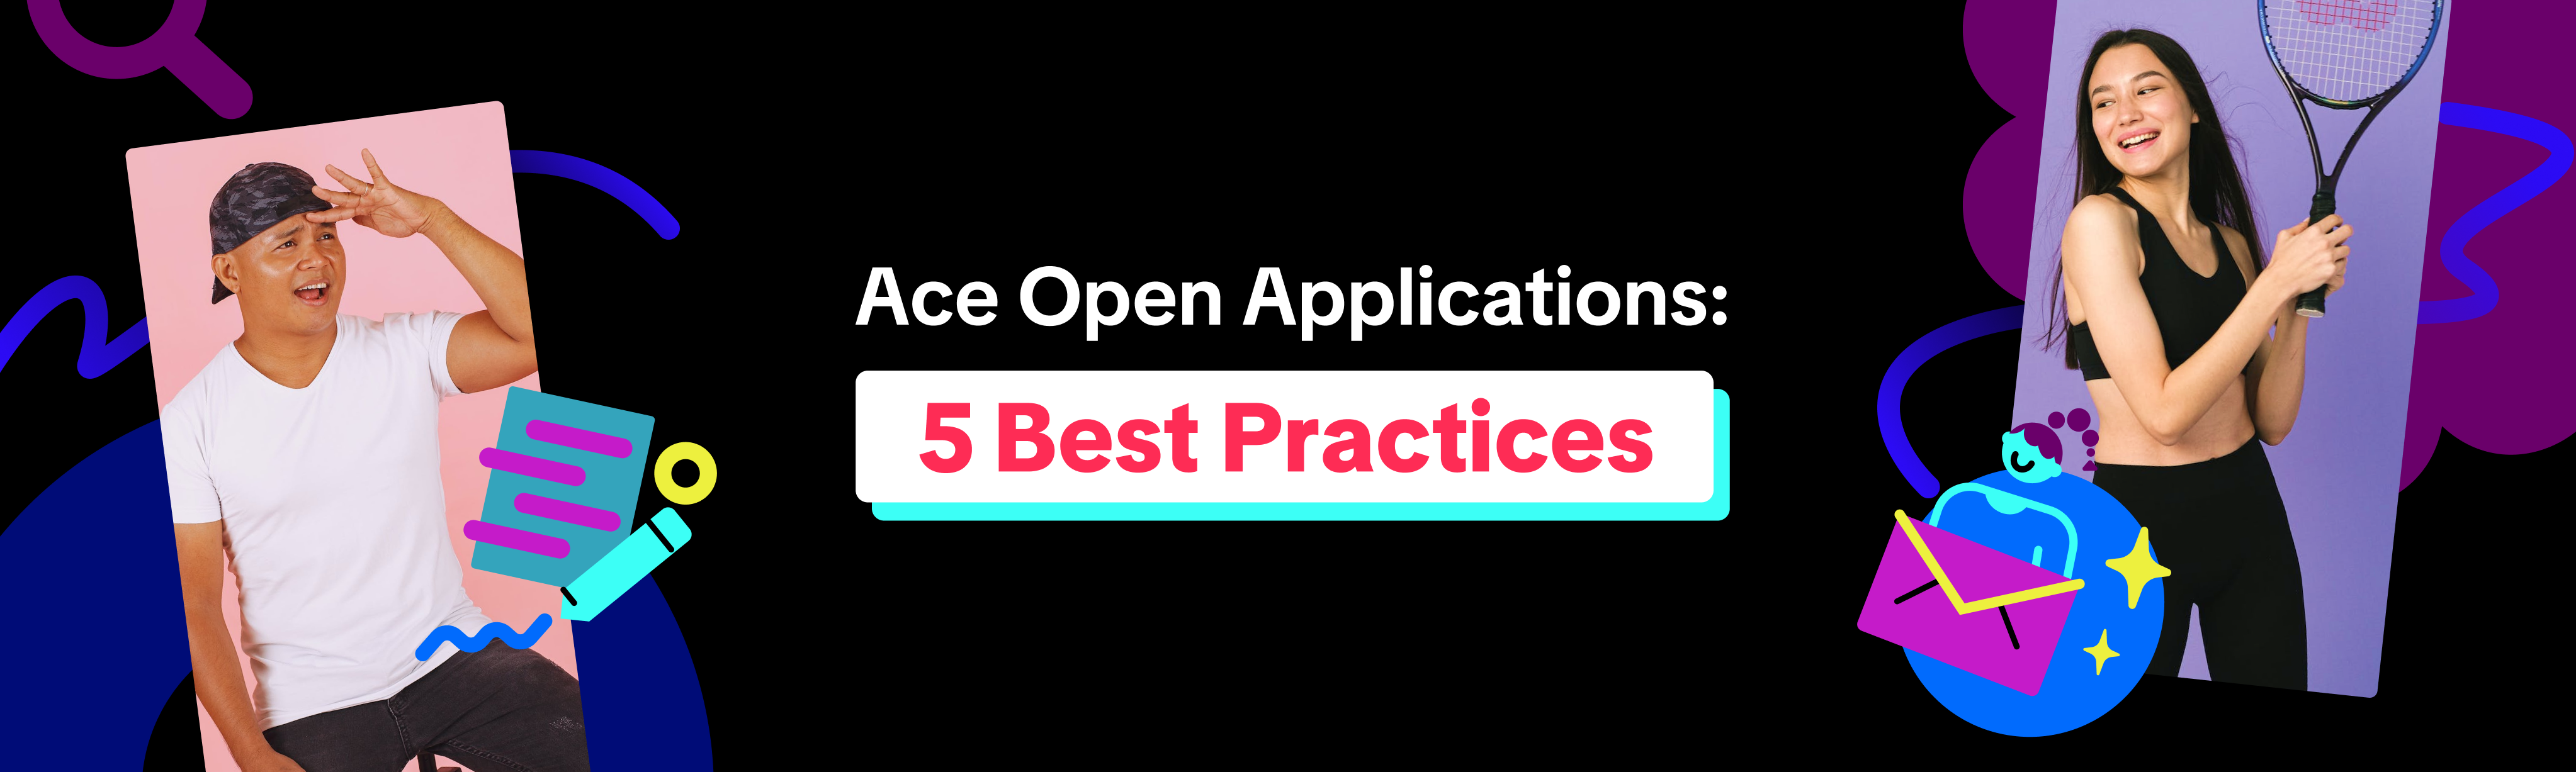 5 tips to ace your Open Applications campaign